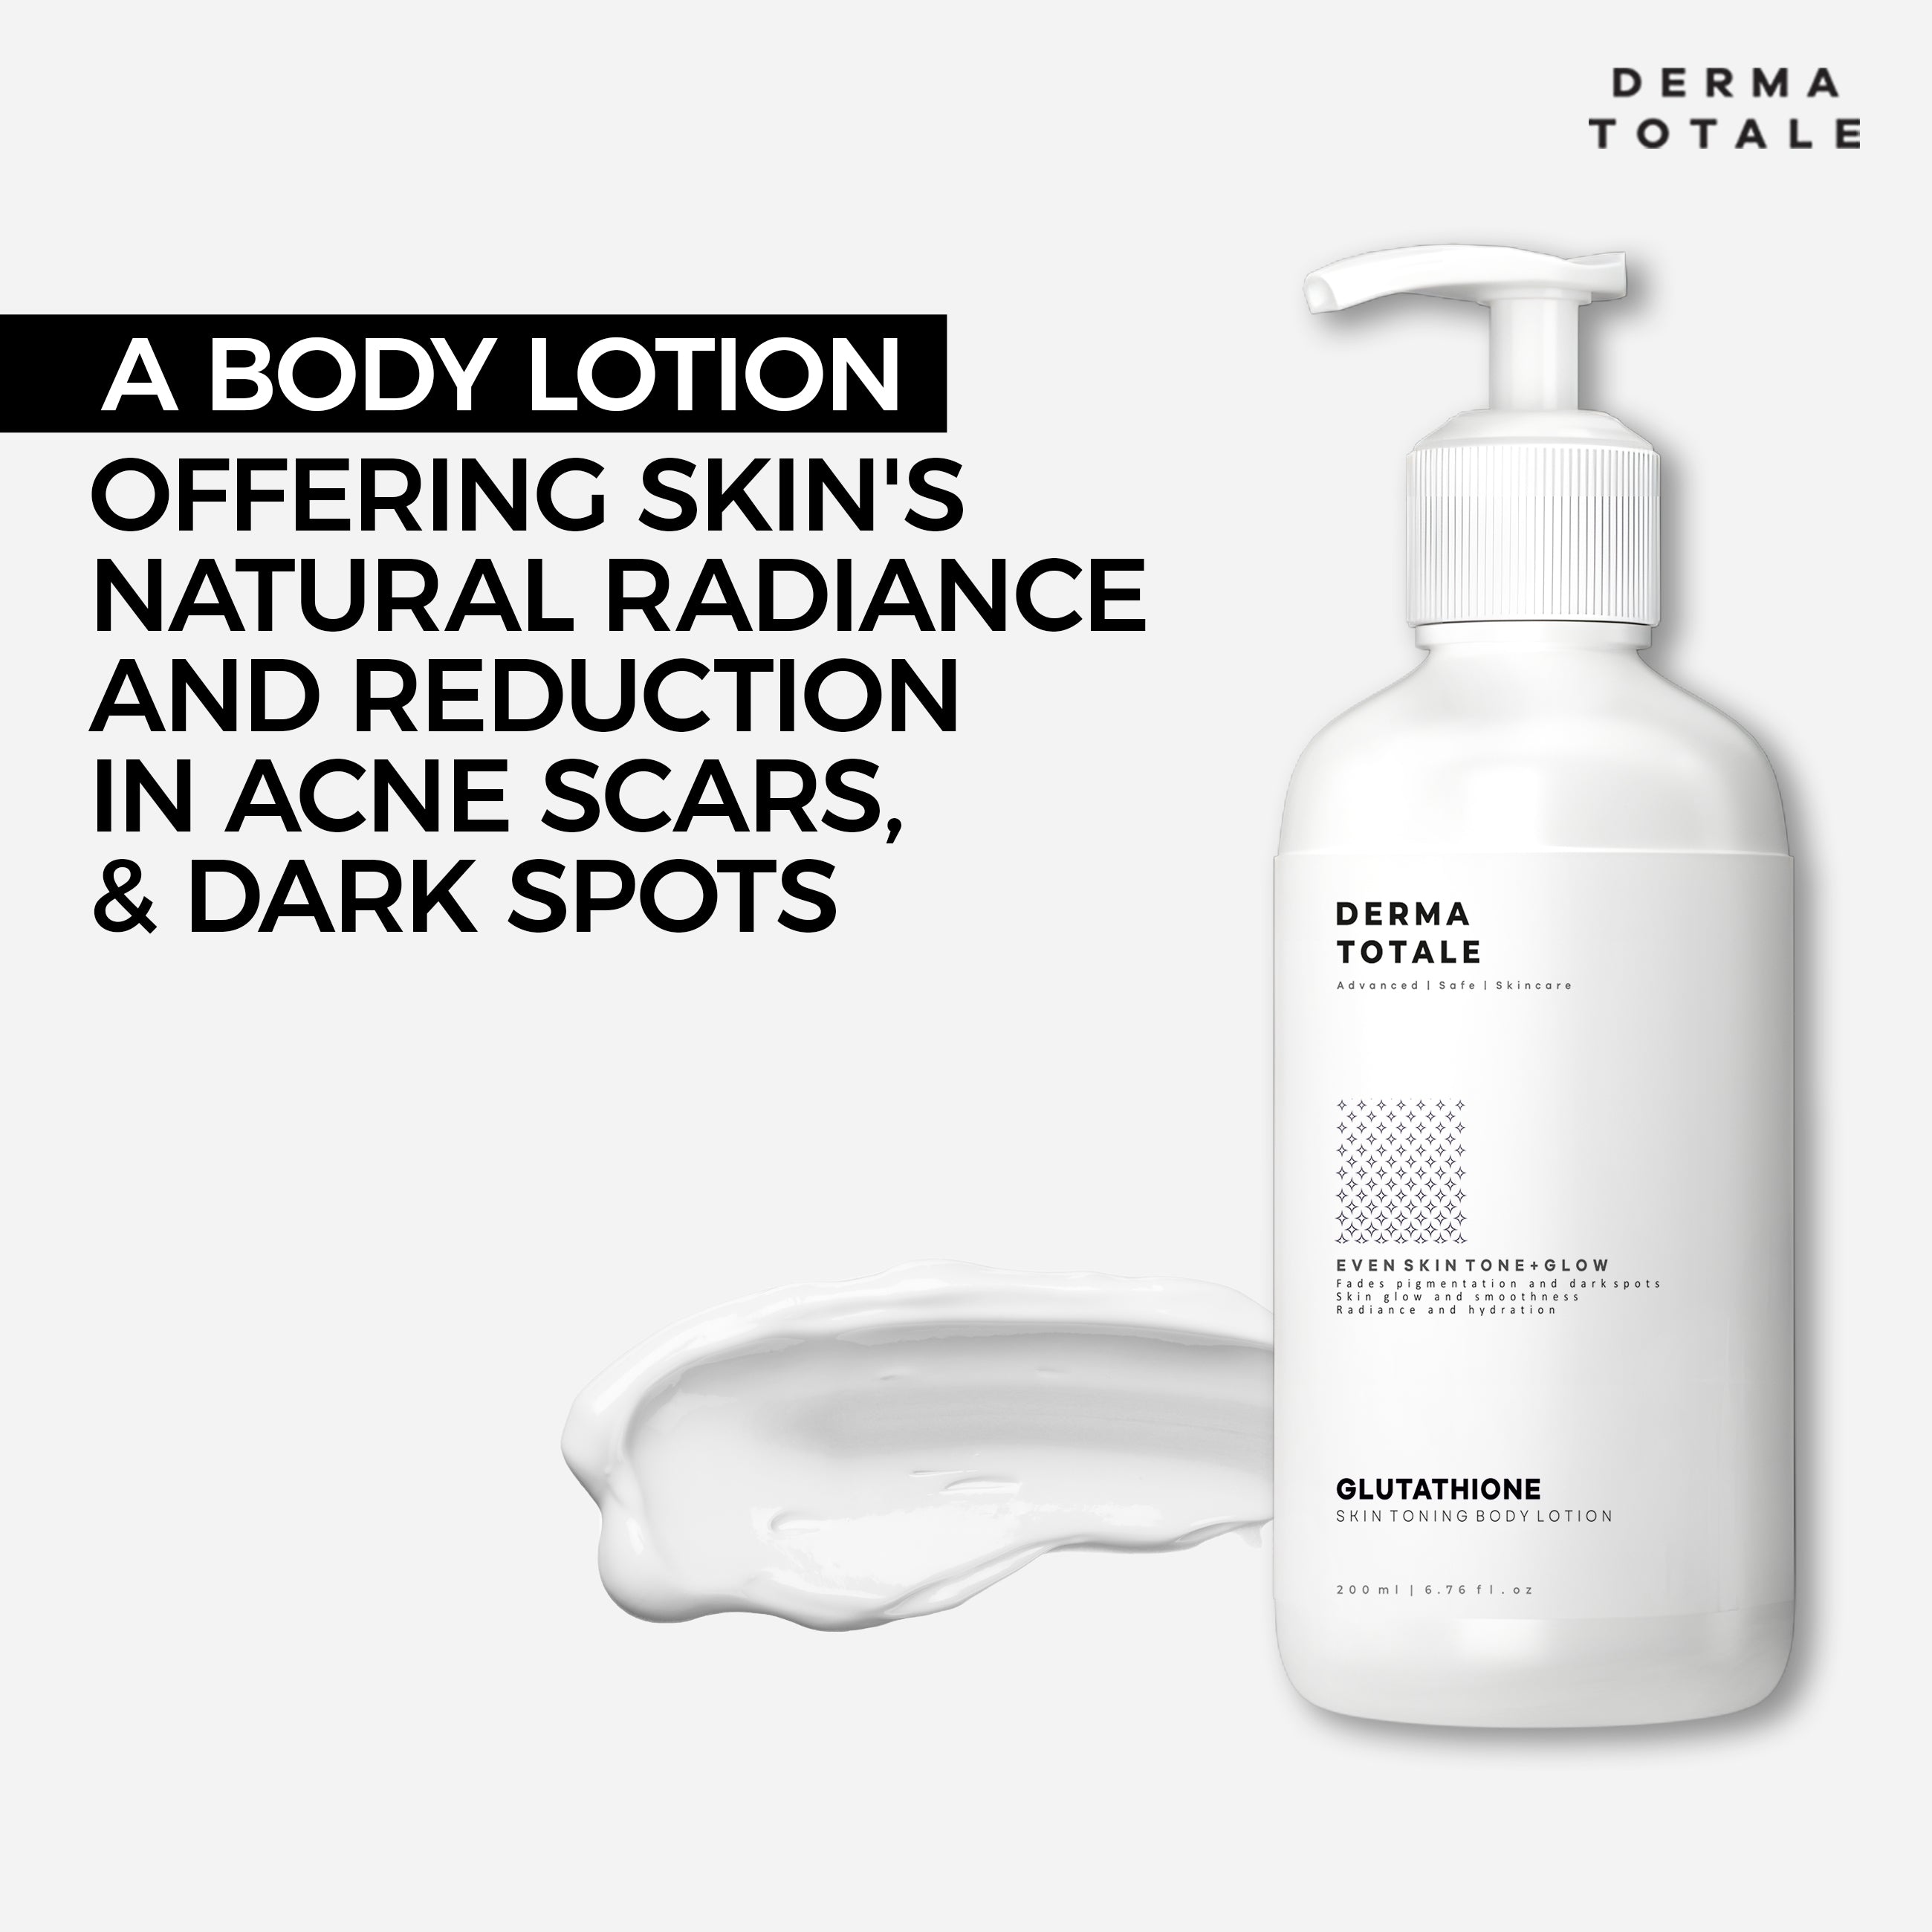 Glutathione Skin Toning Body Lotion - 200ml Features